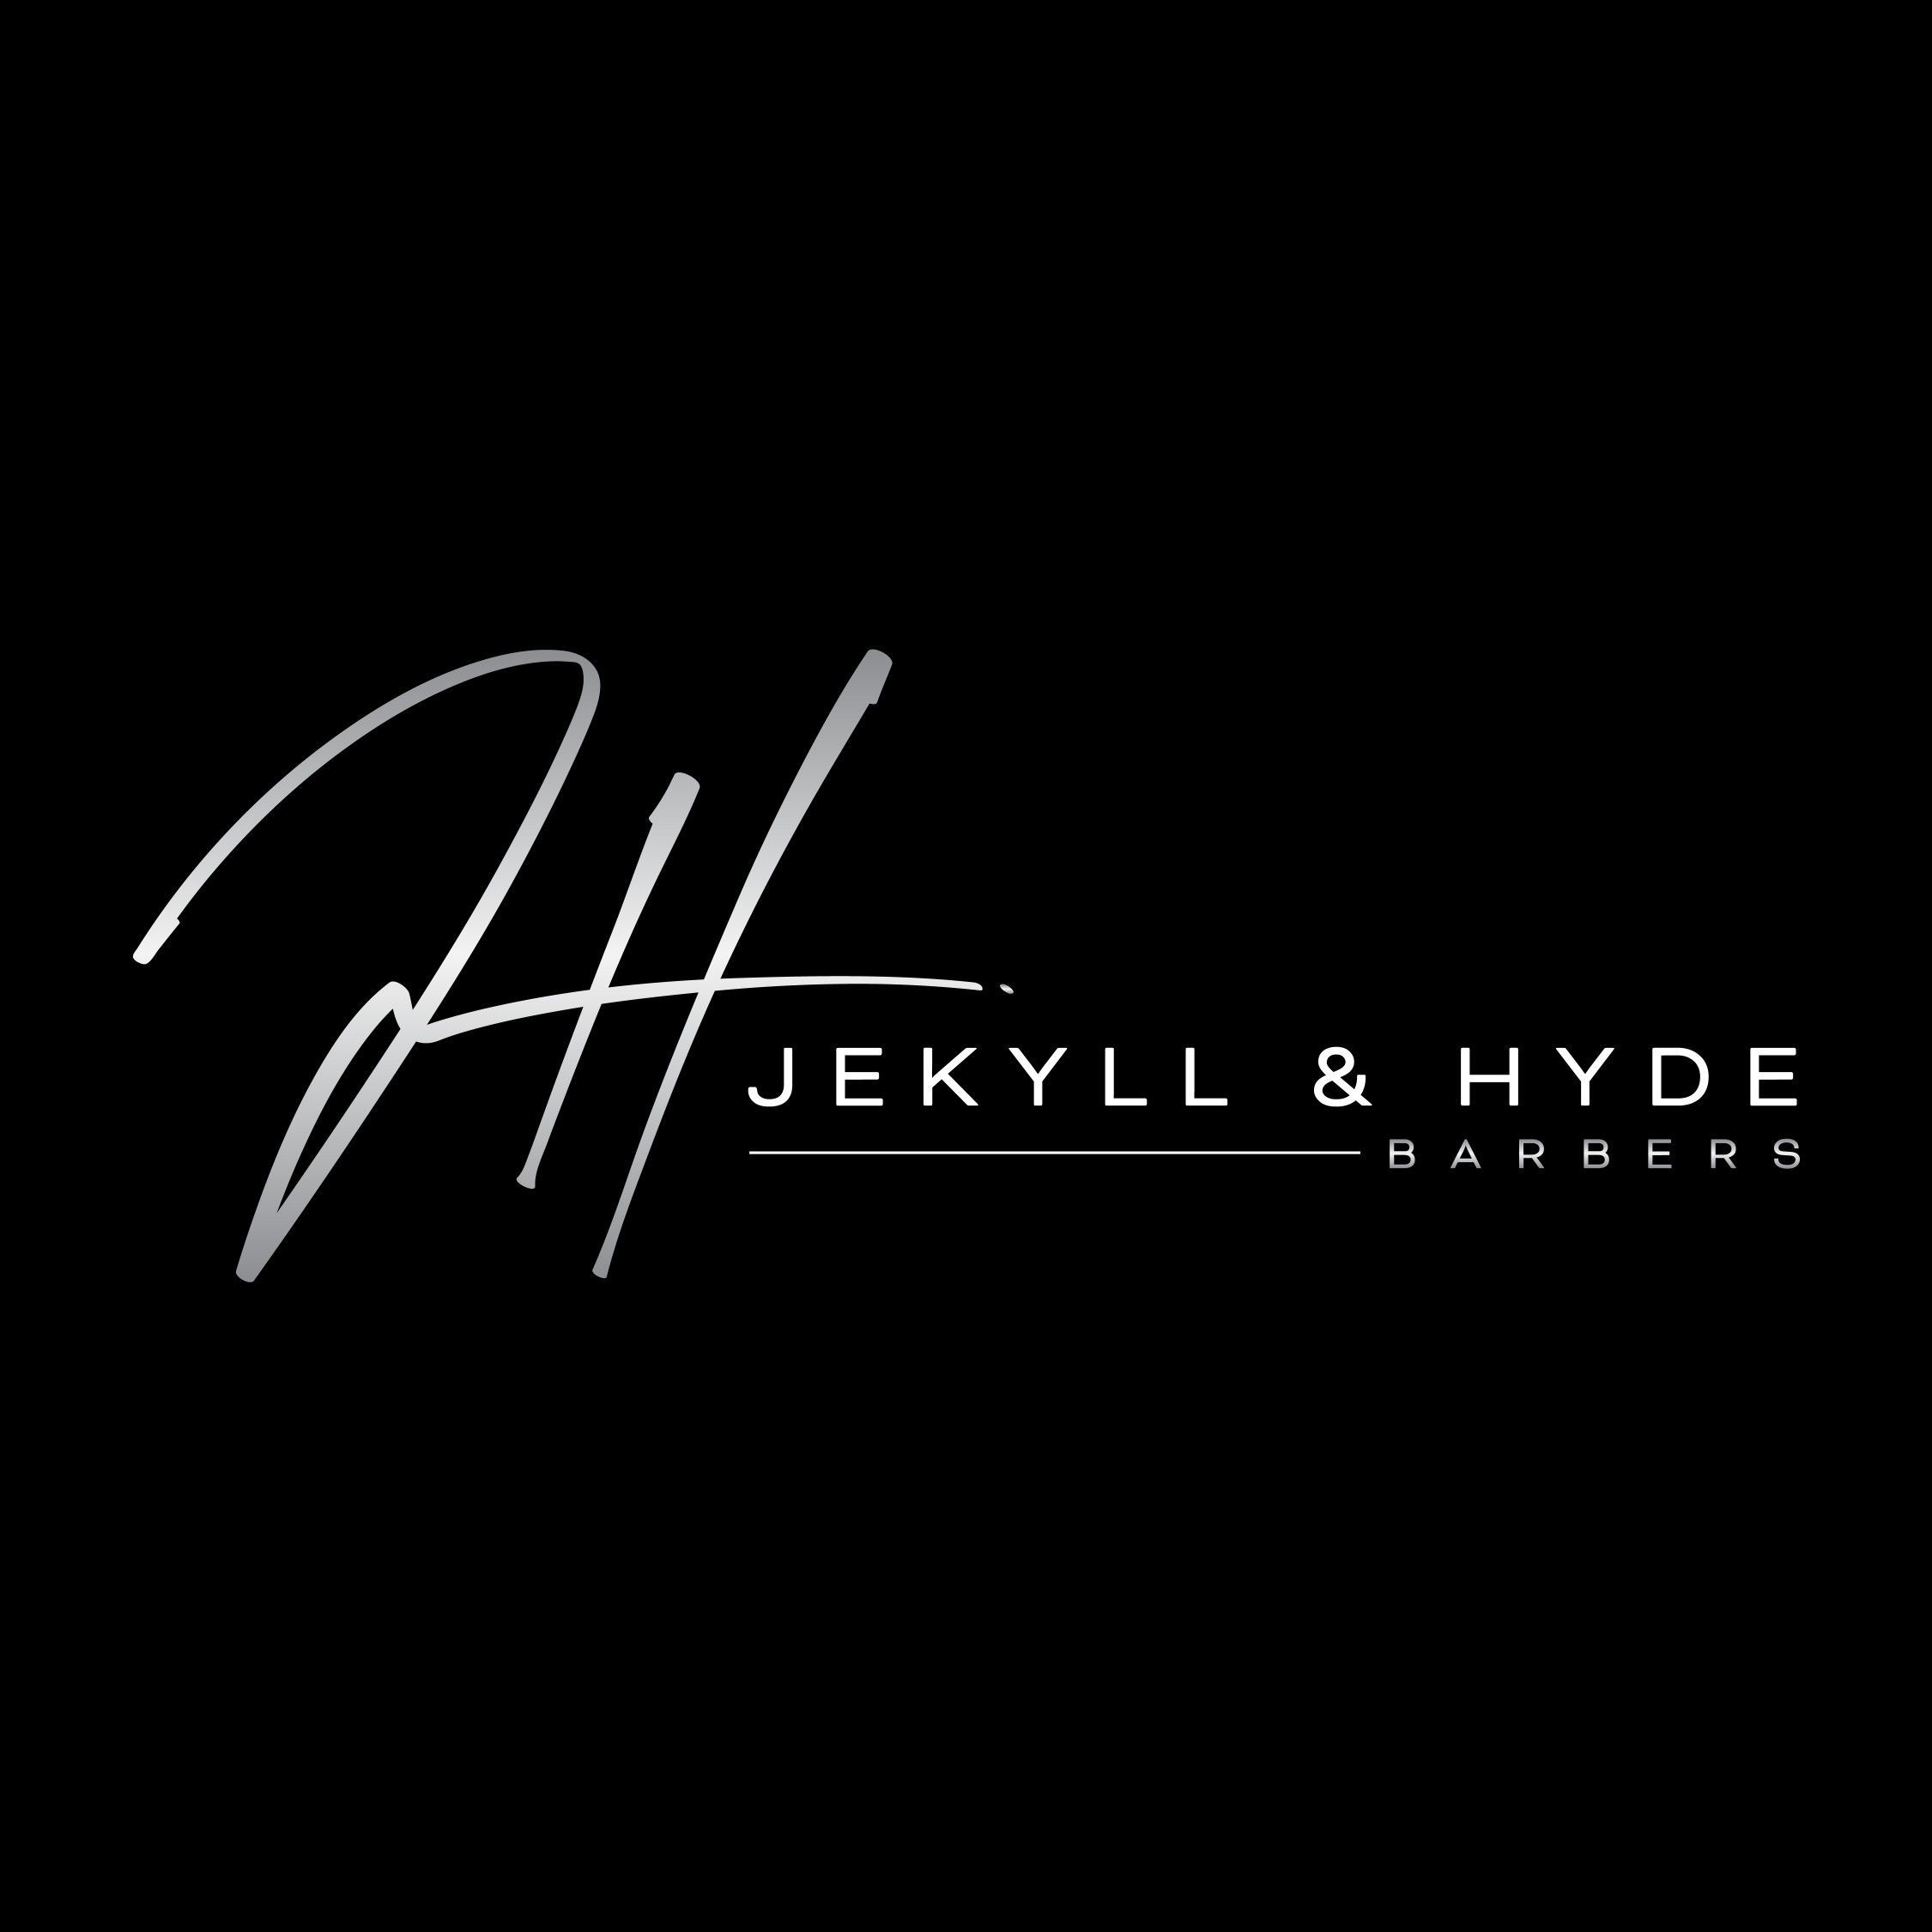 Jekyll and Hyde Barbers